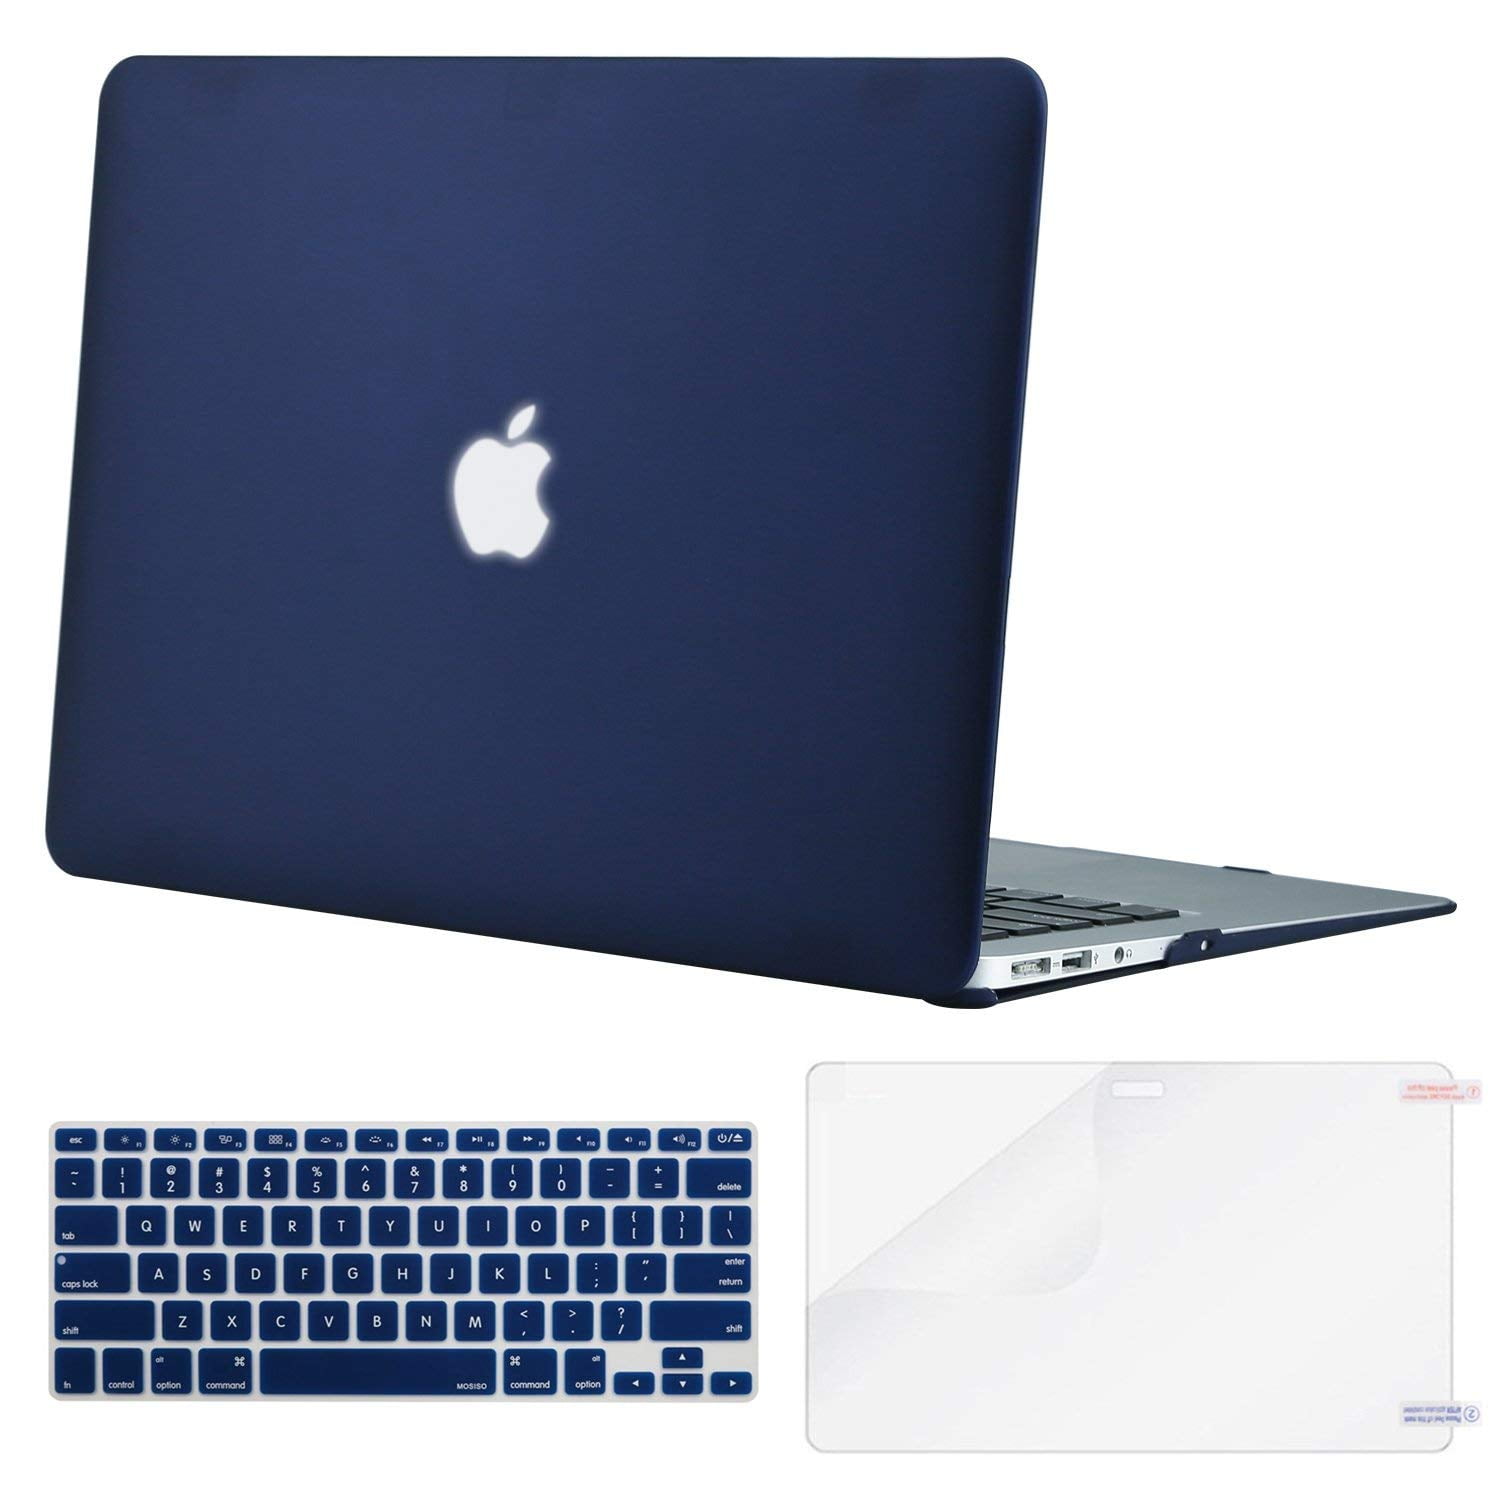 MOSISO Hard Case Compatible MacBook Air 13 inch Model A1369 / A1466 Older Version Release 2010-2017 Ultra Slim Plastic Protective Snap On Shell Cover Silver